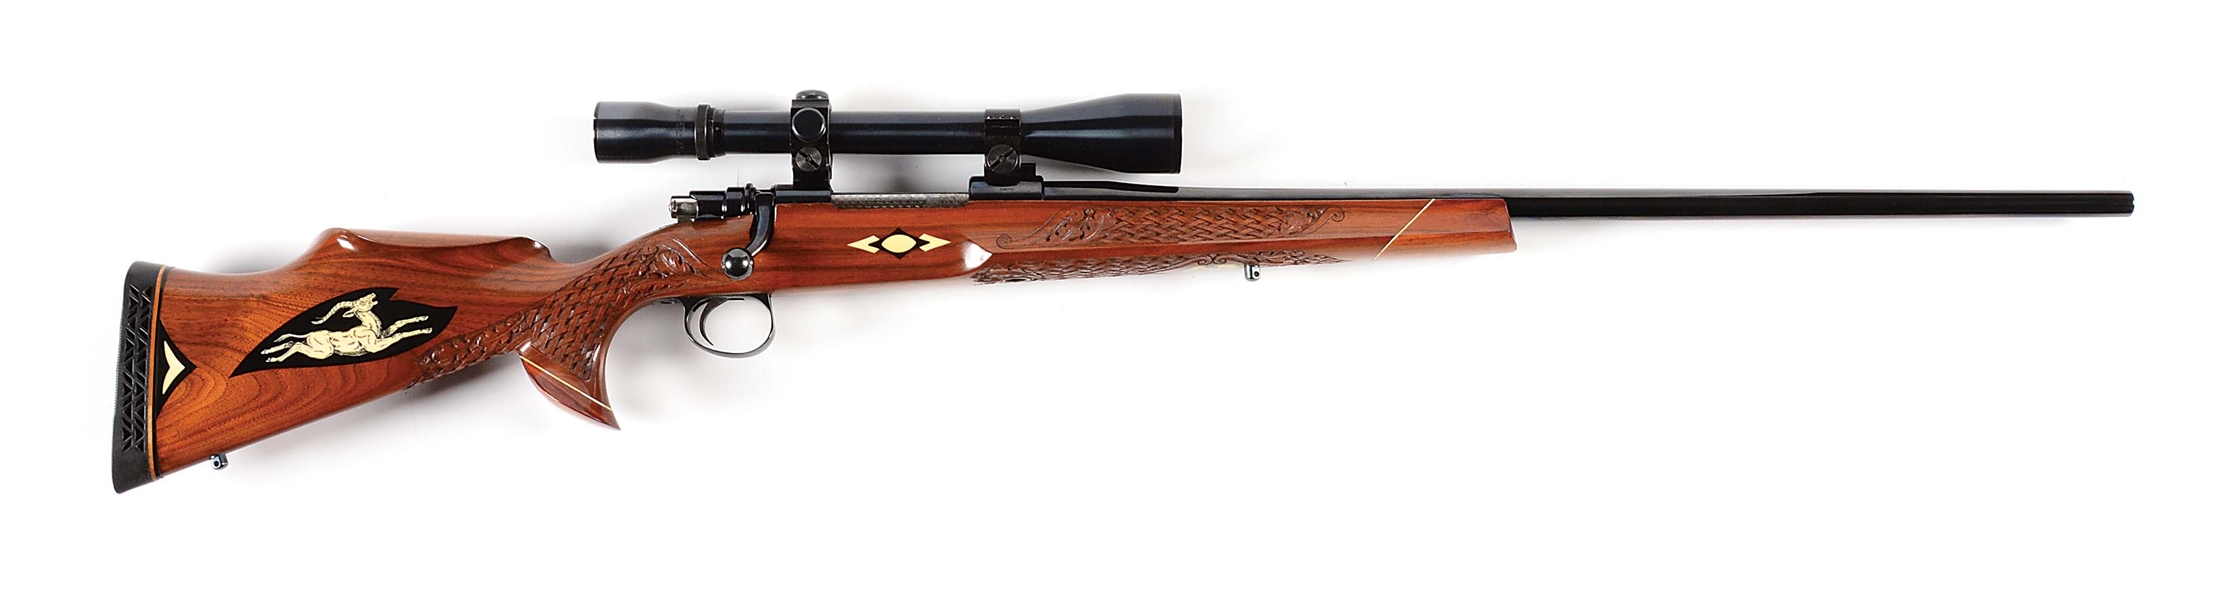 (C) WINSLOW ARMS CO. CROWN CUSTOM .358 NORMA MAGNUM BOLT ACTION RIFLE WITH WEAVER V8 SCOPE.